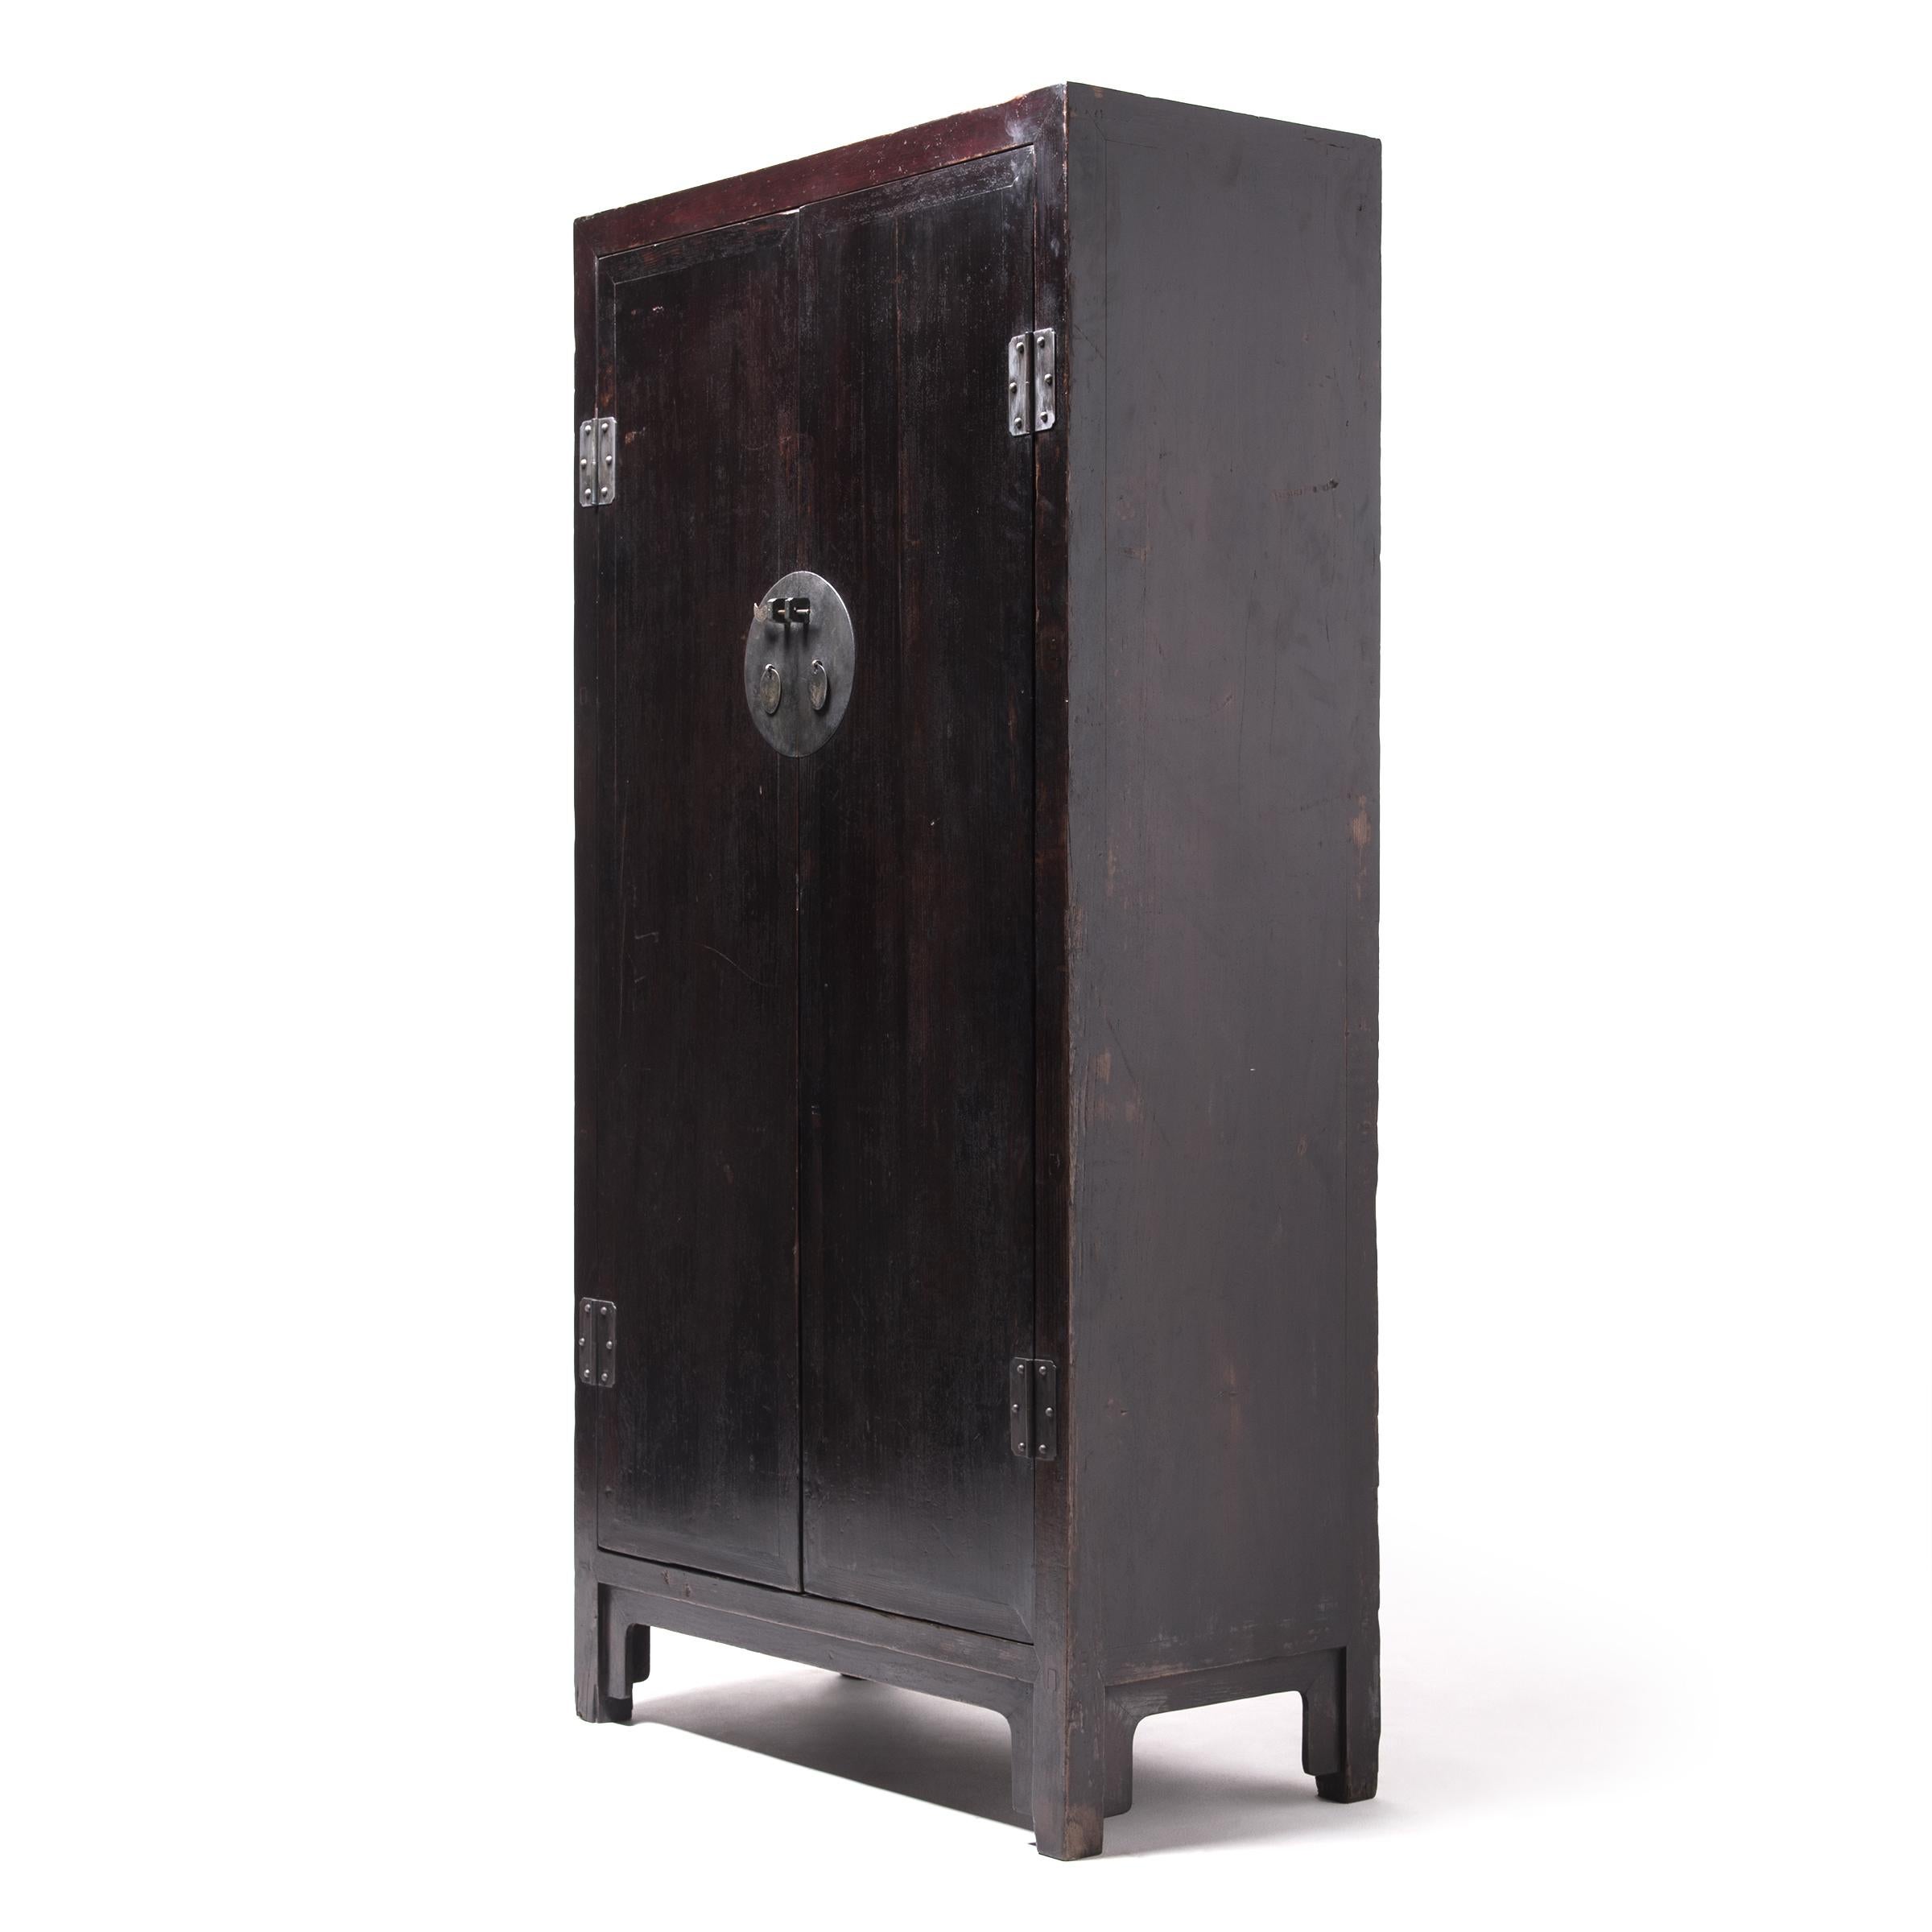 Qing Grande armoire d'angle carre chinoise, vers 1850 en vente